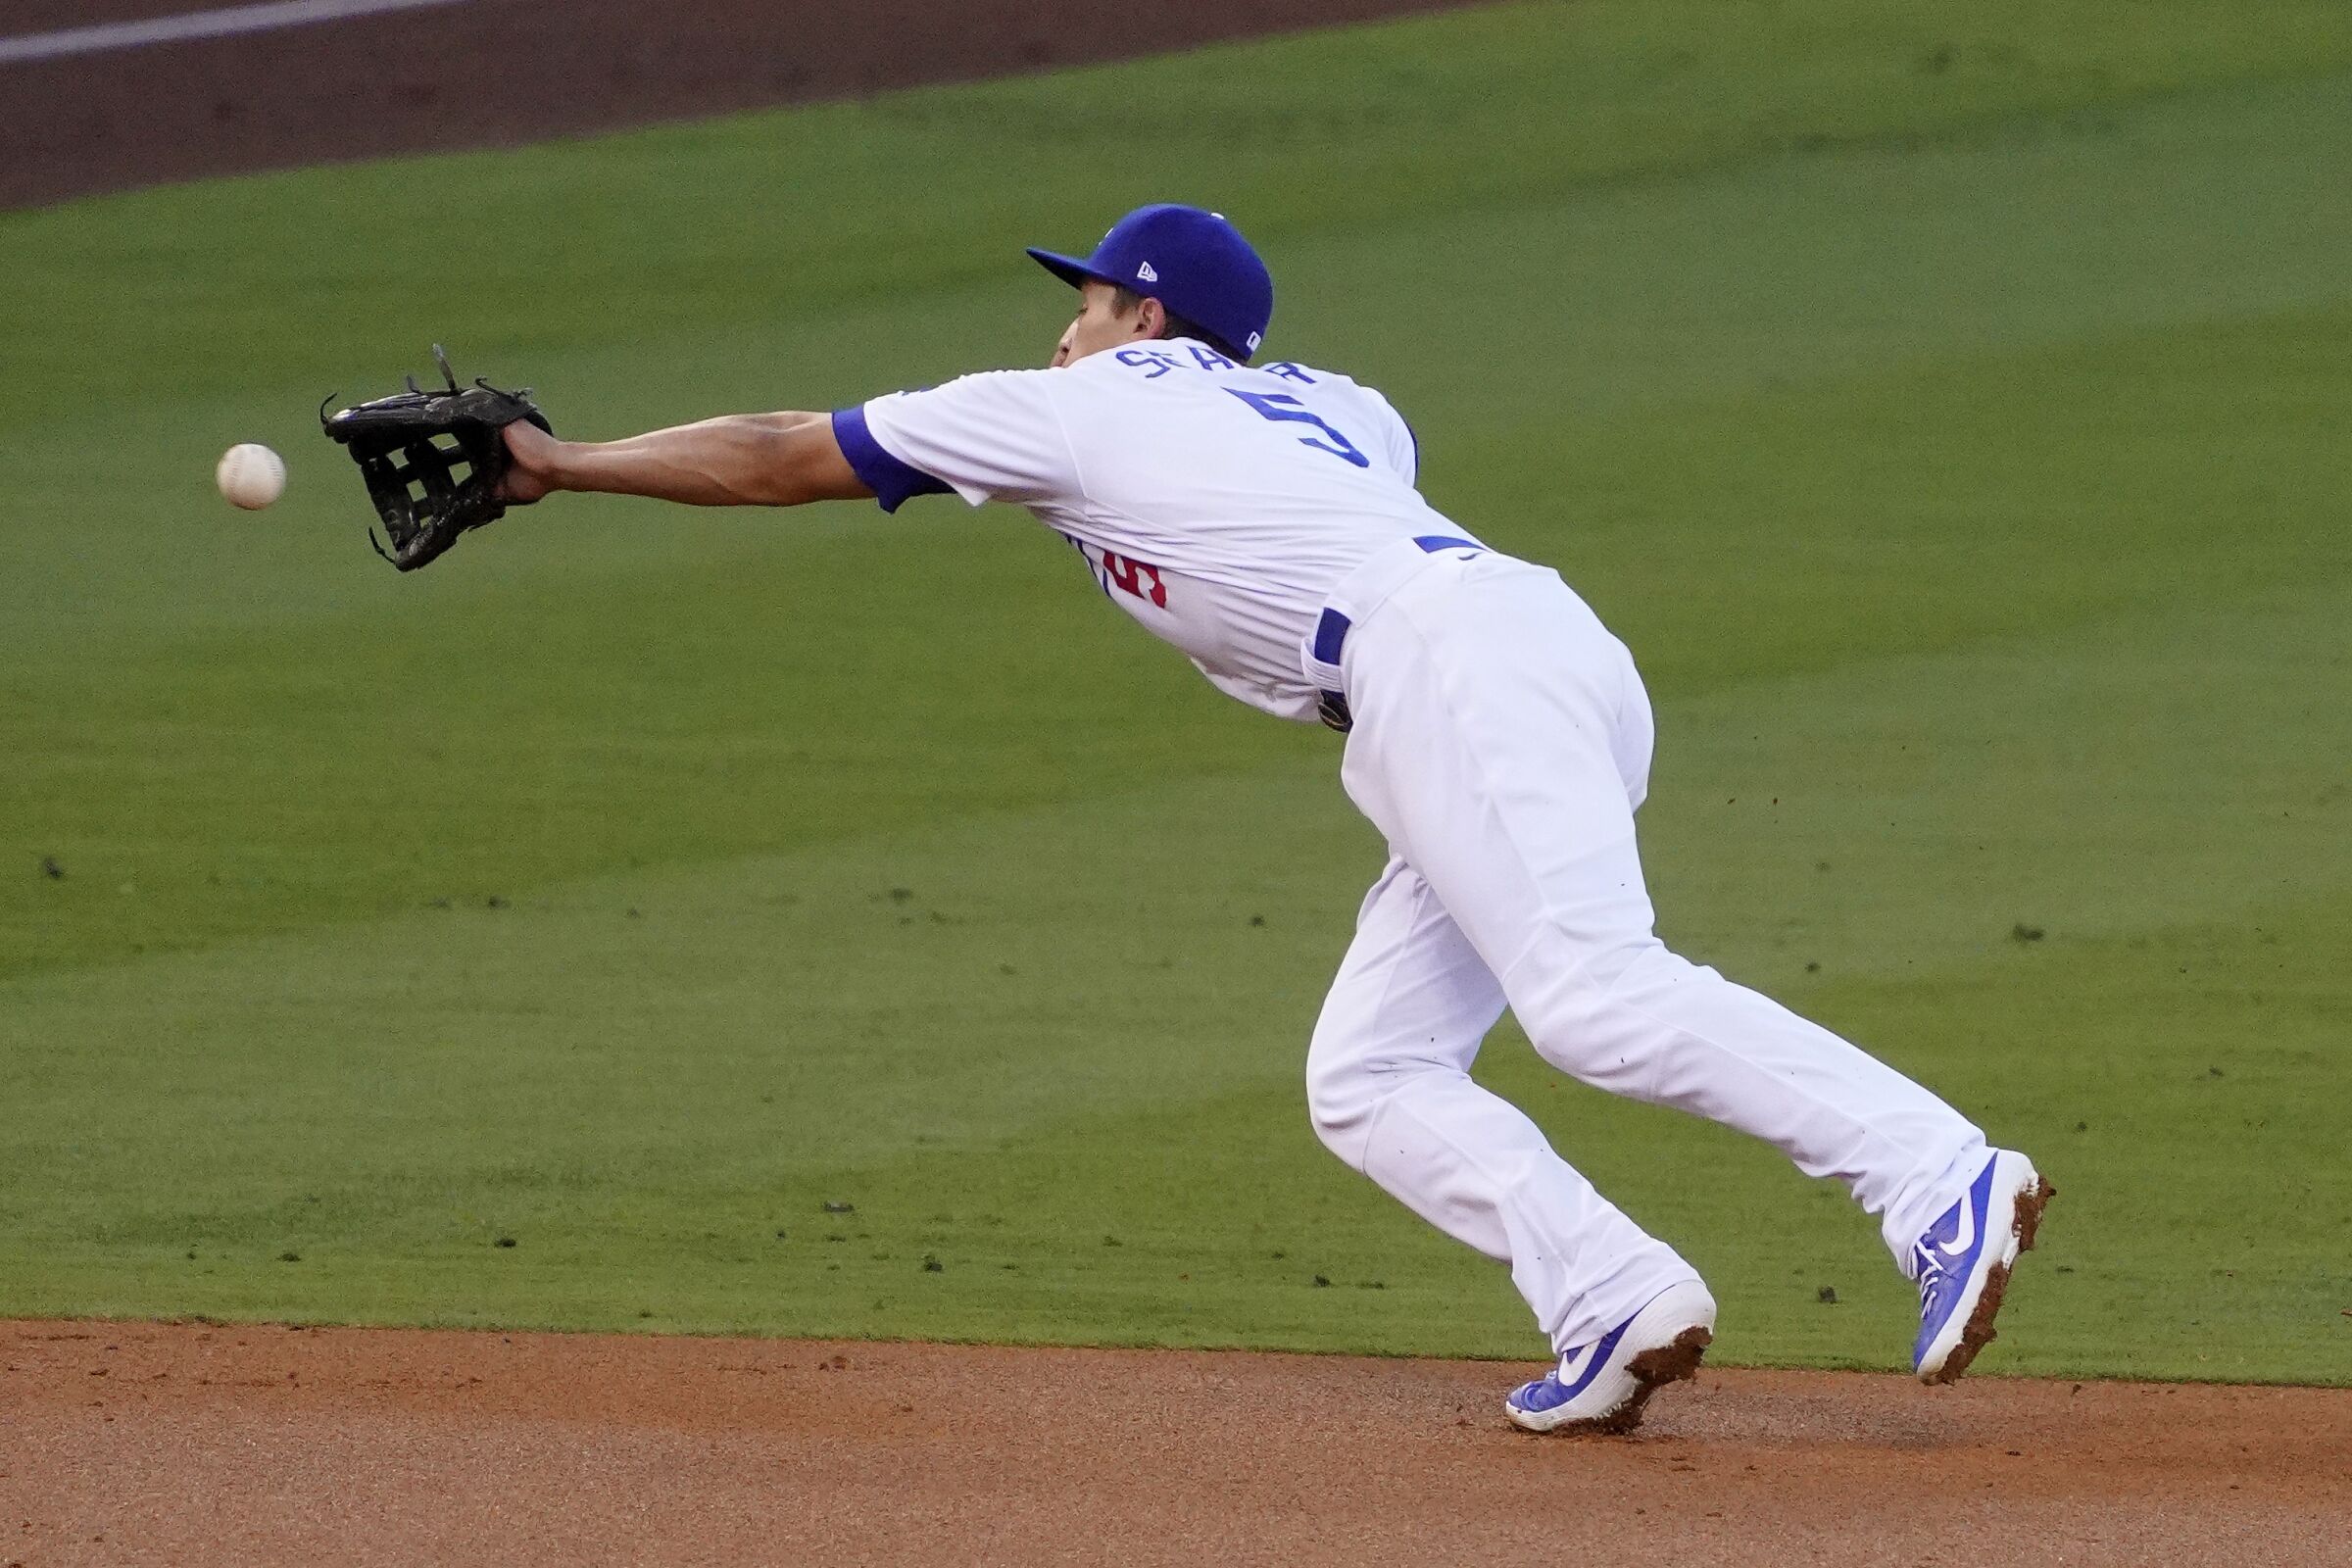 Dodgers shortstop Corey Seager can't reach a ball hit by the Giants on Aug. 7, 2020.